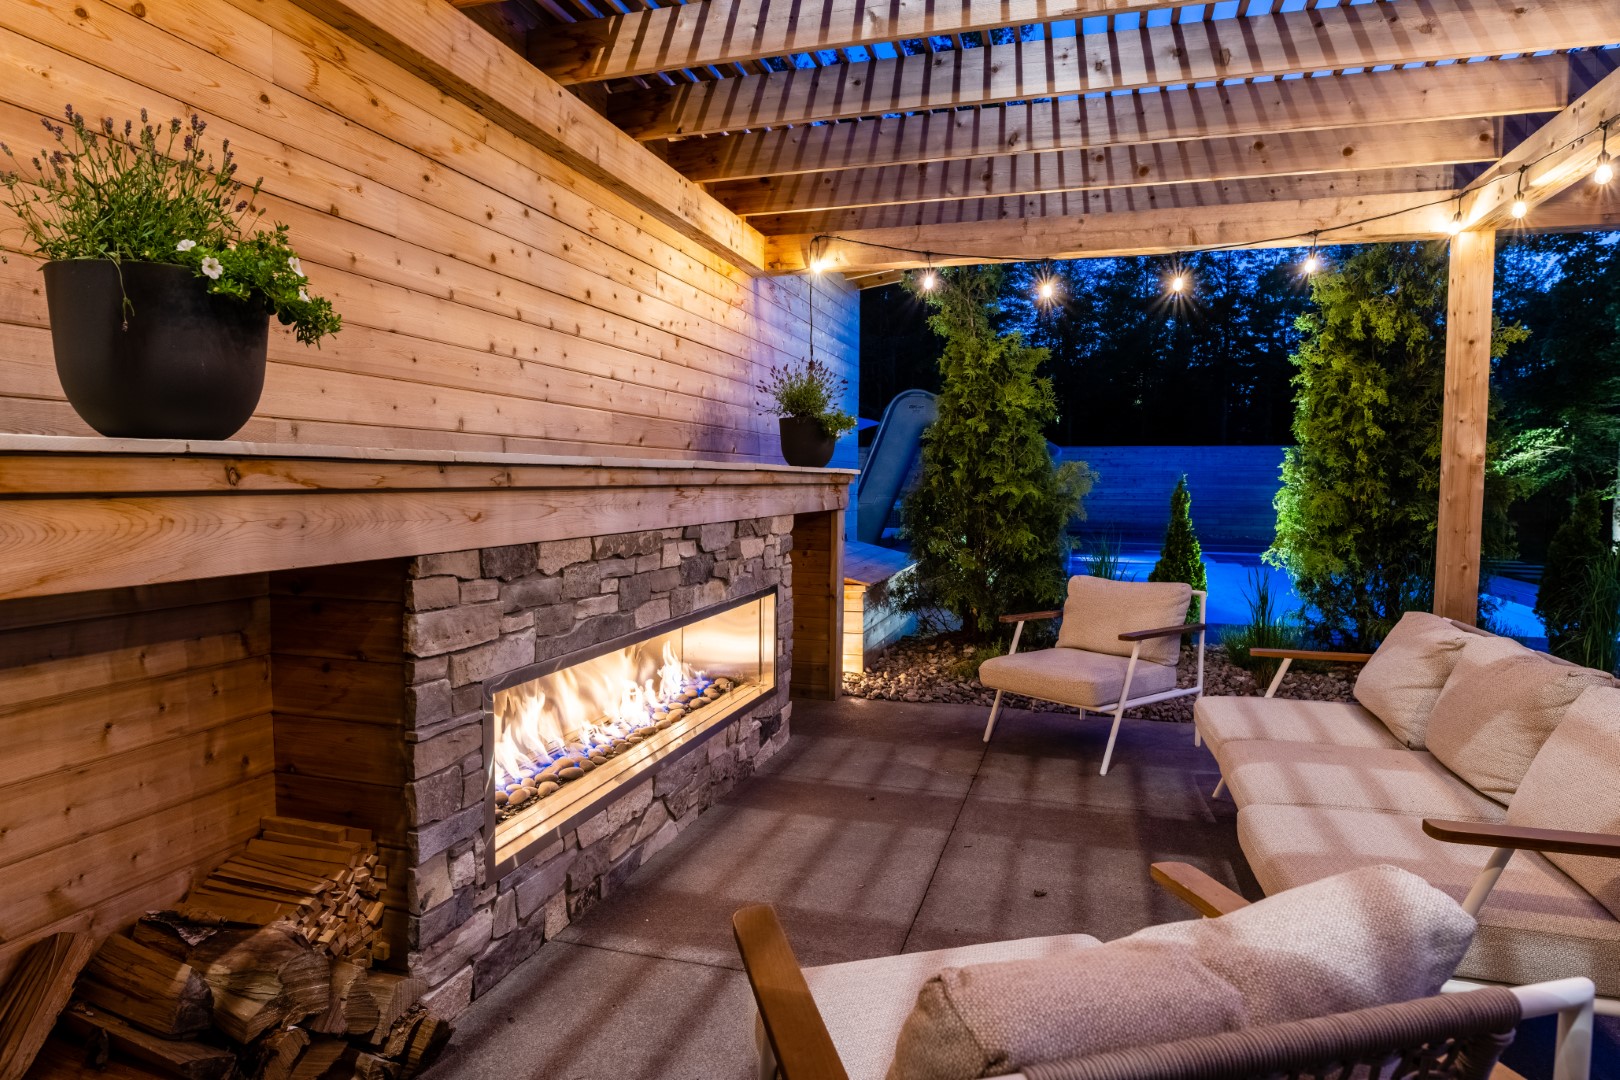 Roaring fireplace with seating in Pergola, installed in Moncton next to pool